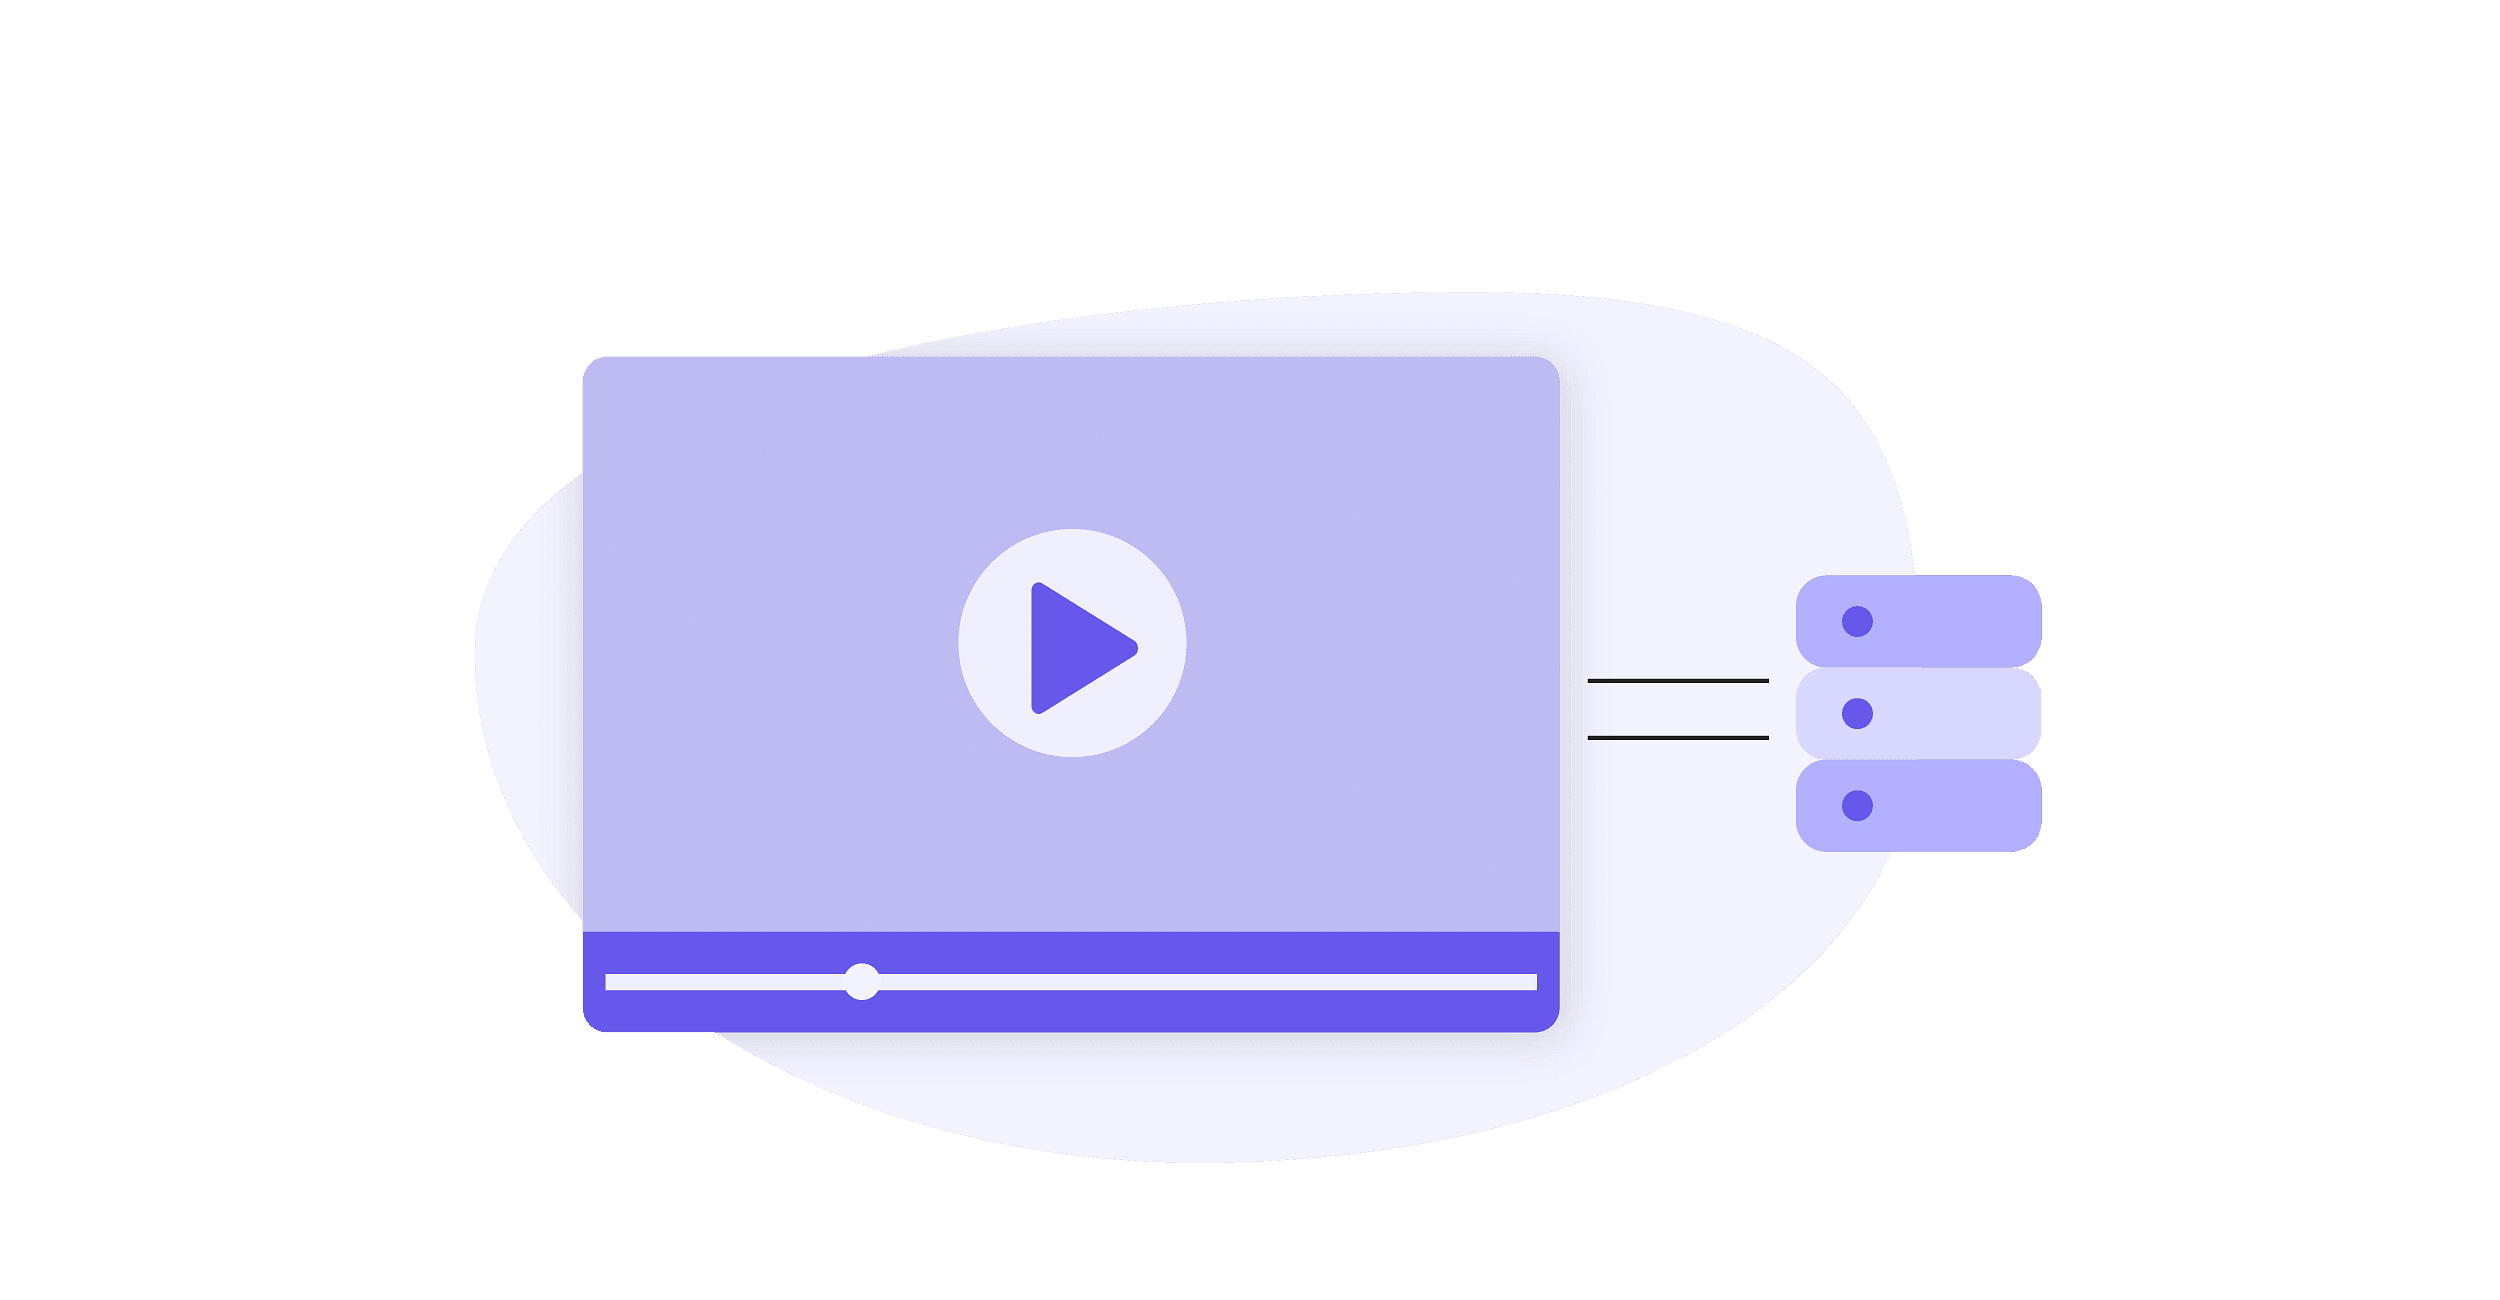 Measure and track latency metrics to eliminate all edge cases and make every view on your videos remarkable.